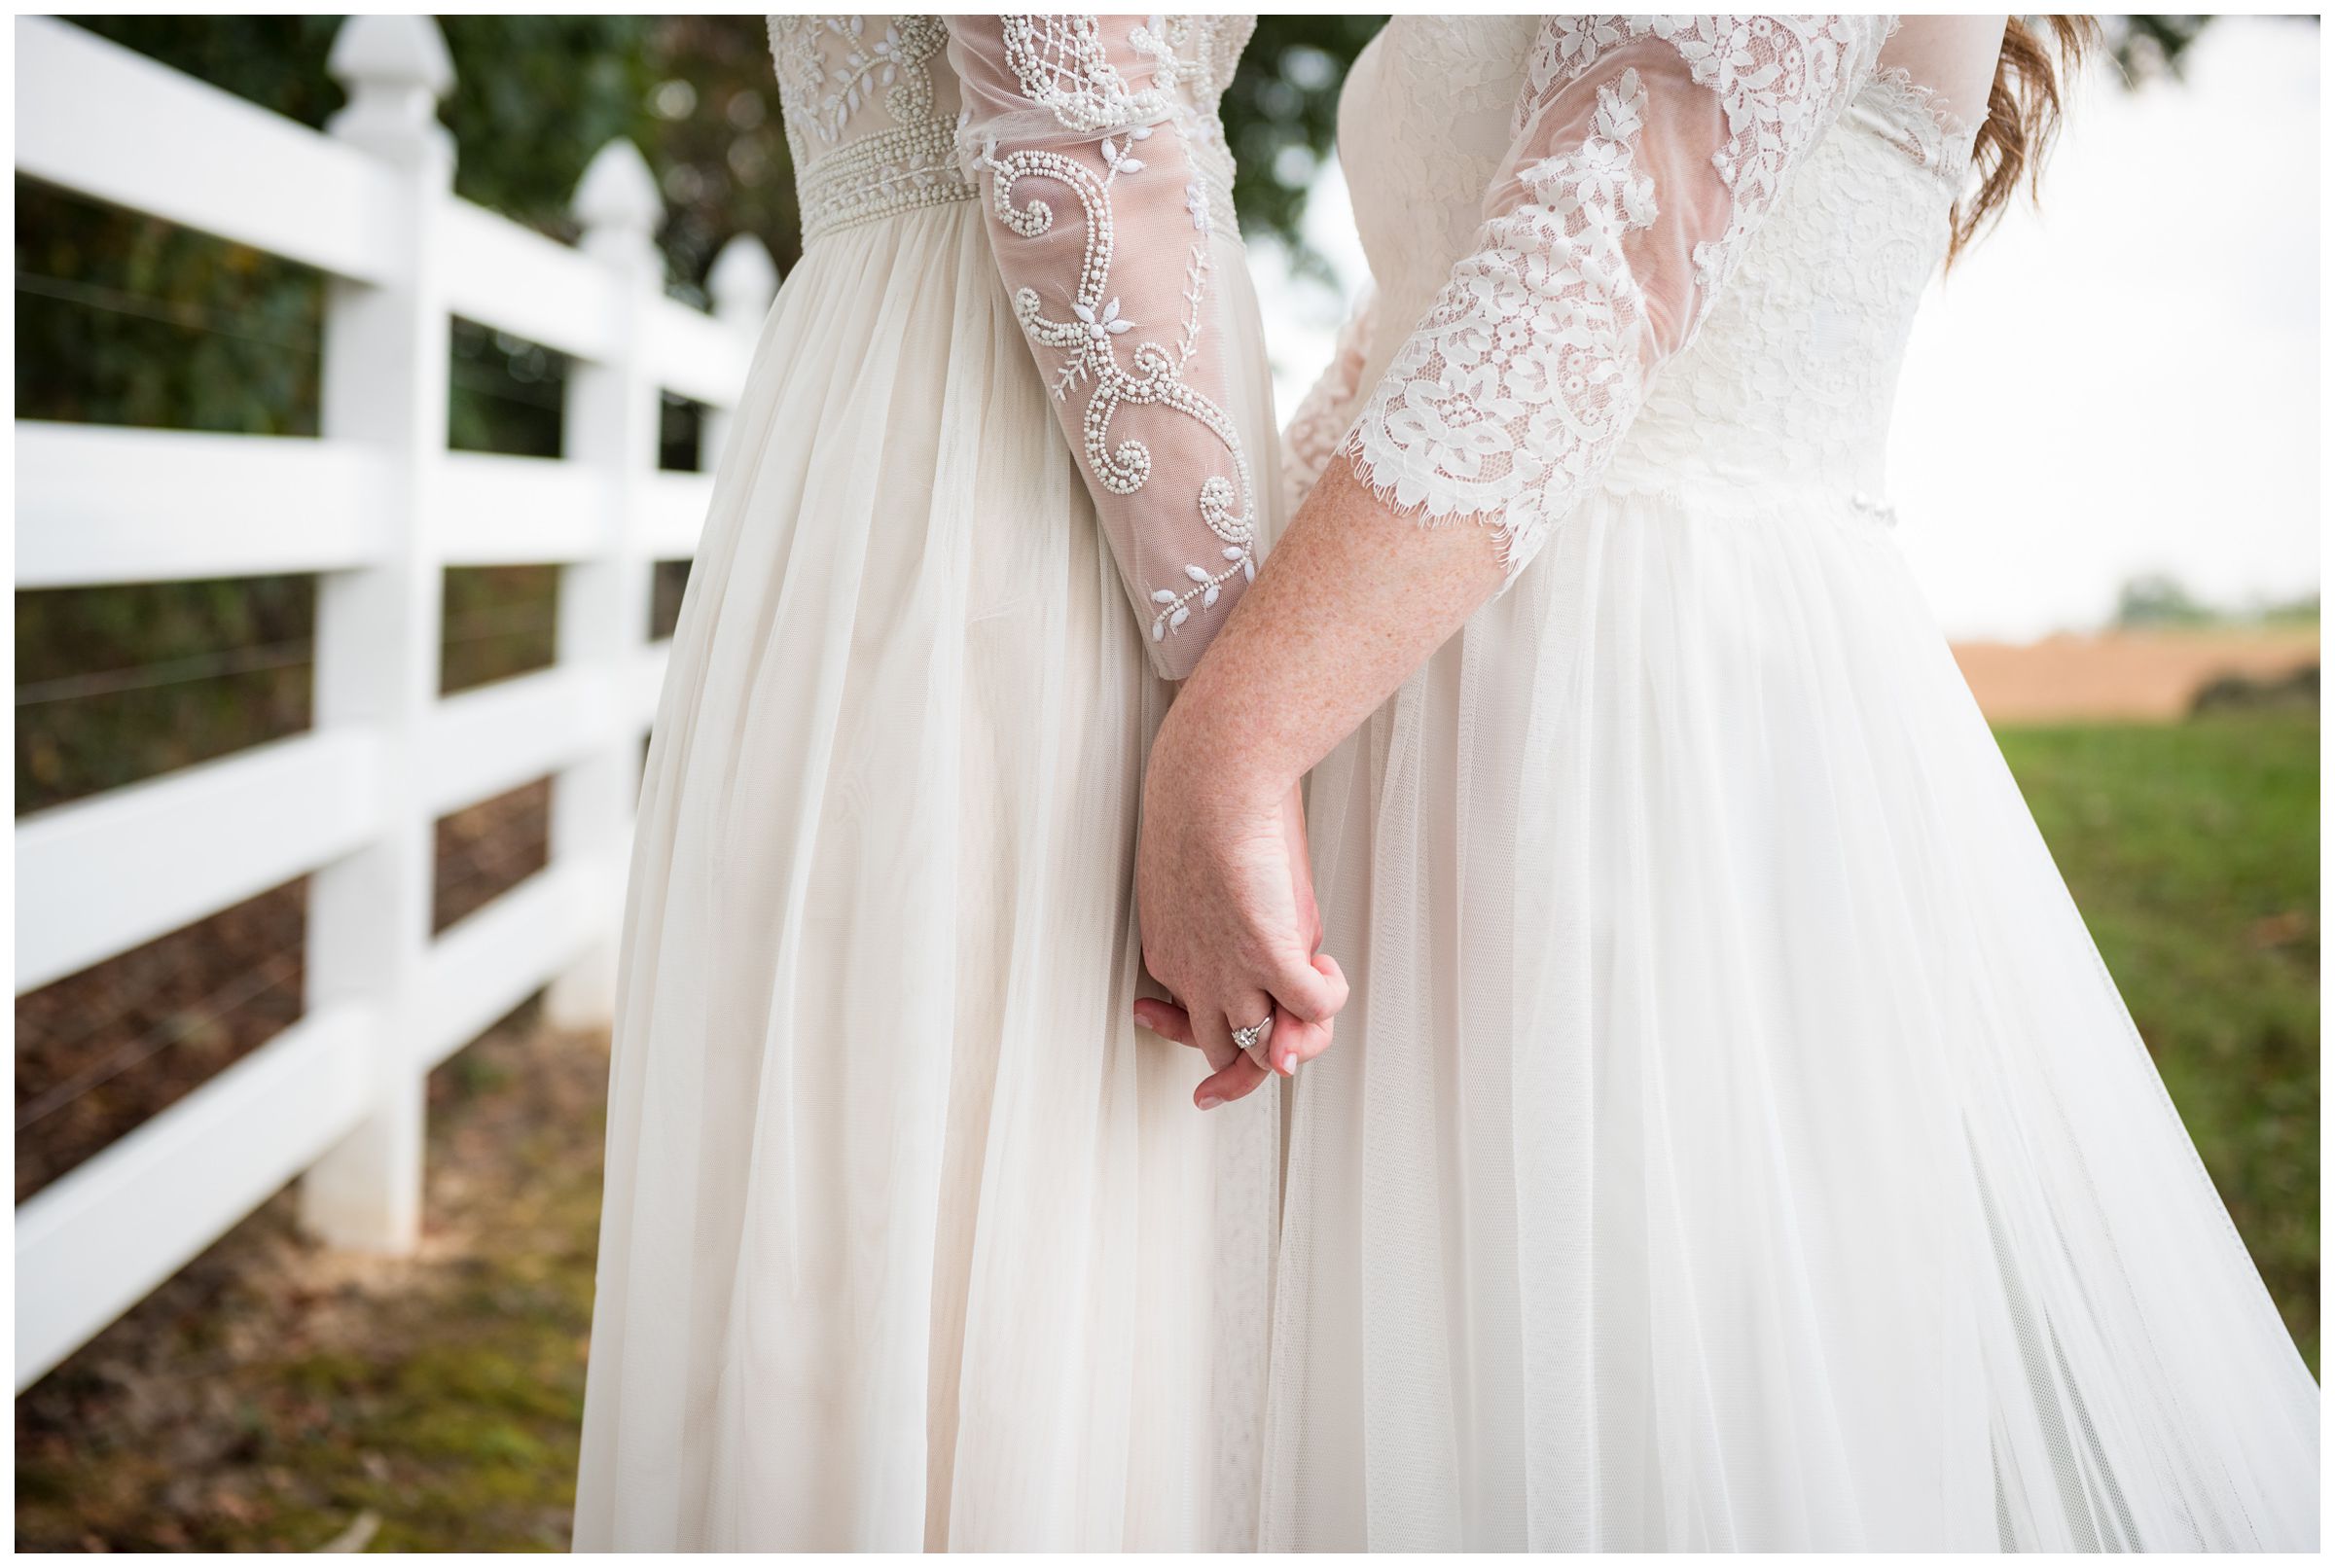 Two brides holding hands on wedding day in dresses with lace sleeves.